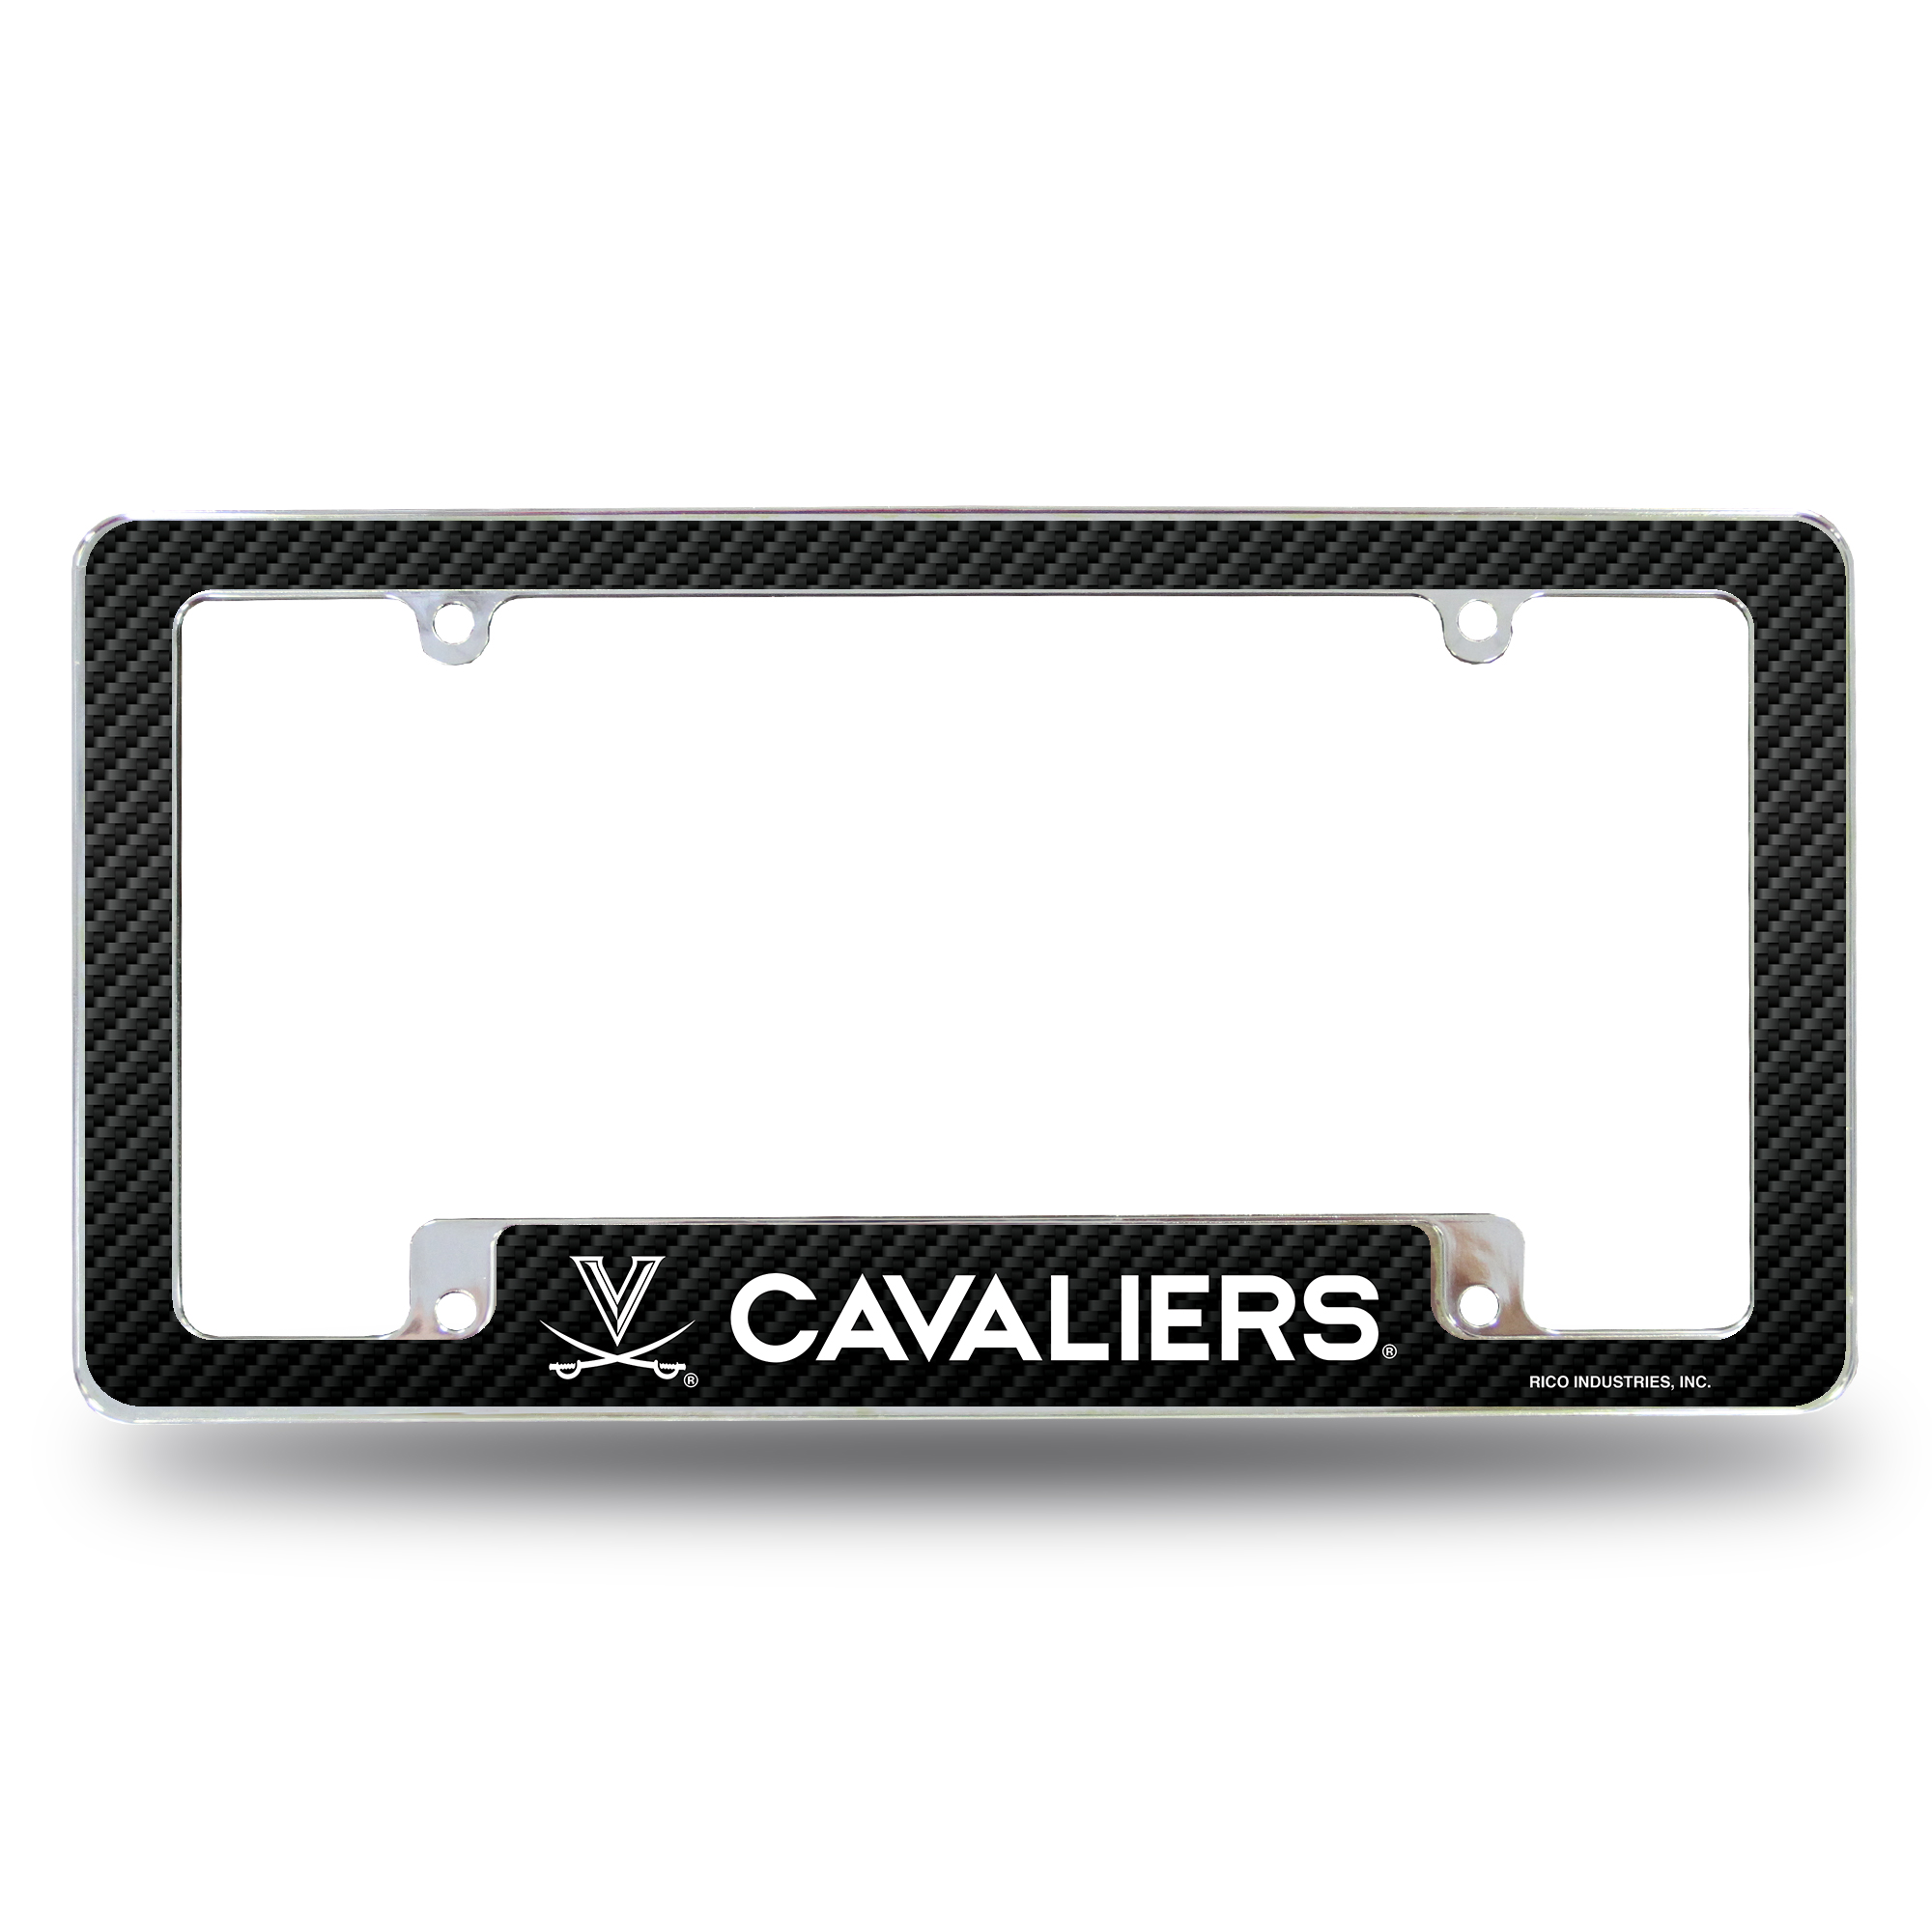 Virginia NCAA Cavaliers Chrome Metal License Plate Frame with Carbon Fiber Design - image 1 of 8